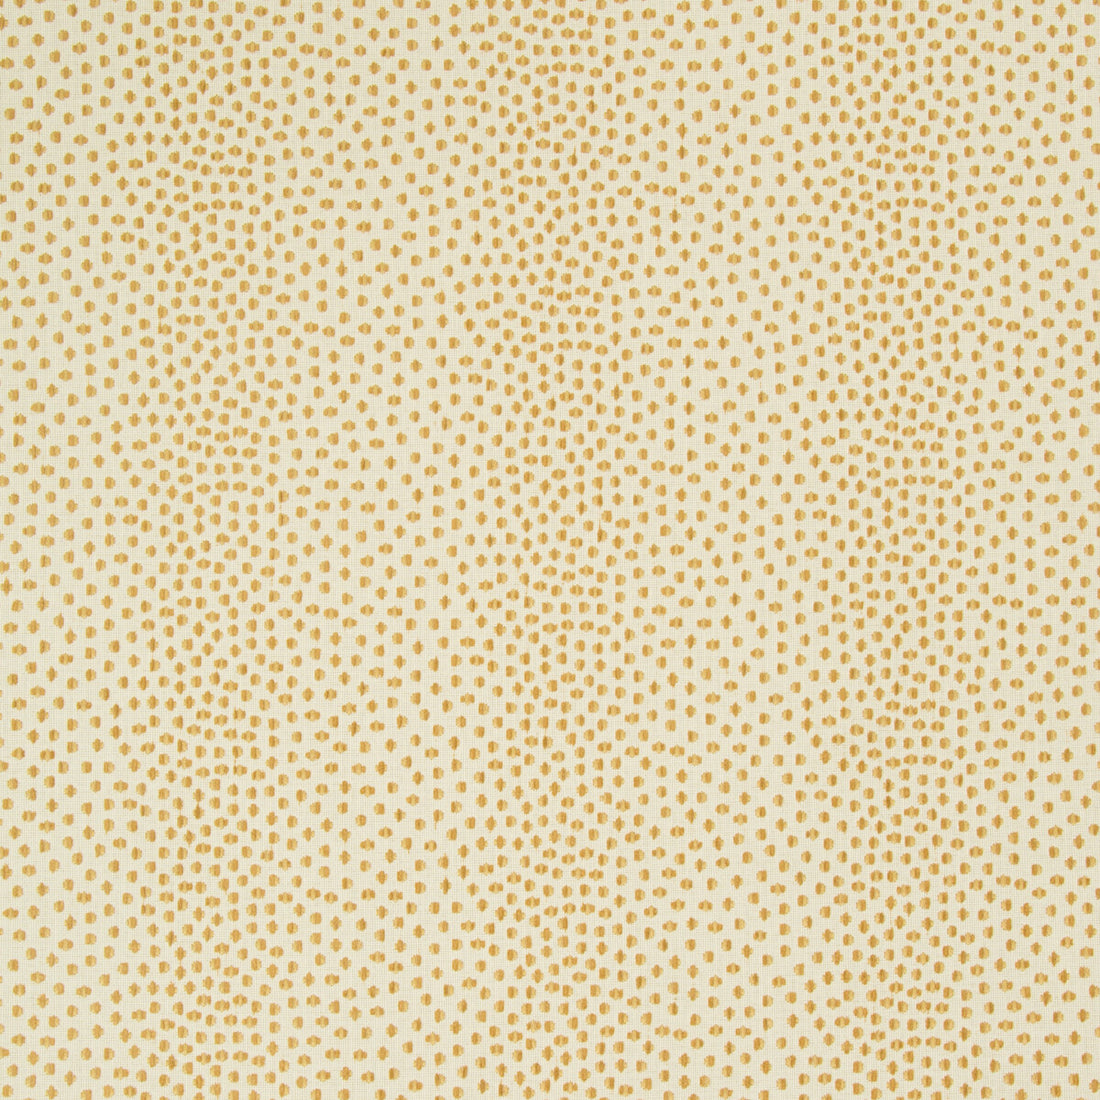 Kravet Design fabric in 34710-16 color - pattern 34710.16.0 - by Kravet Design in the Crypton Home collection